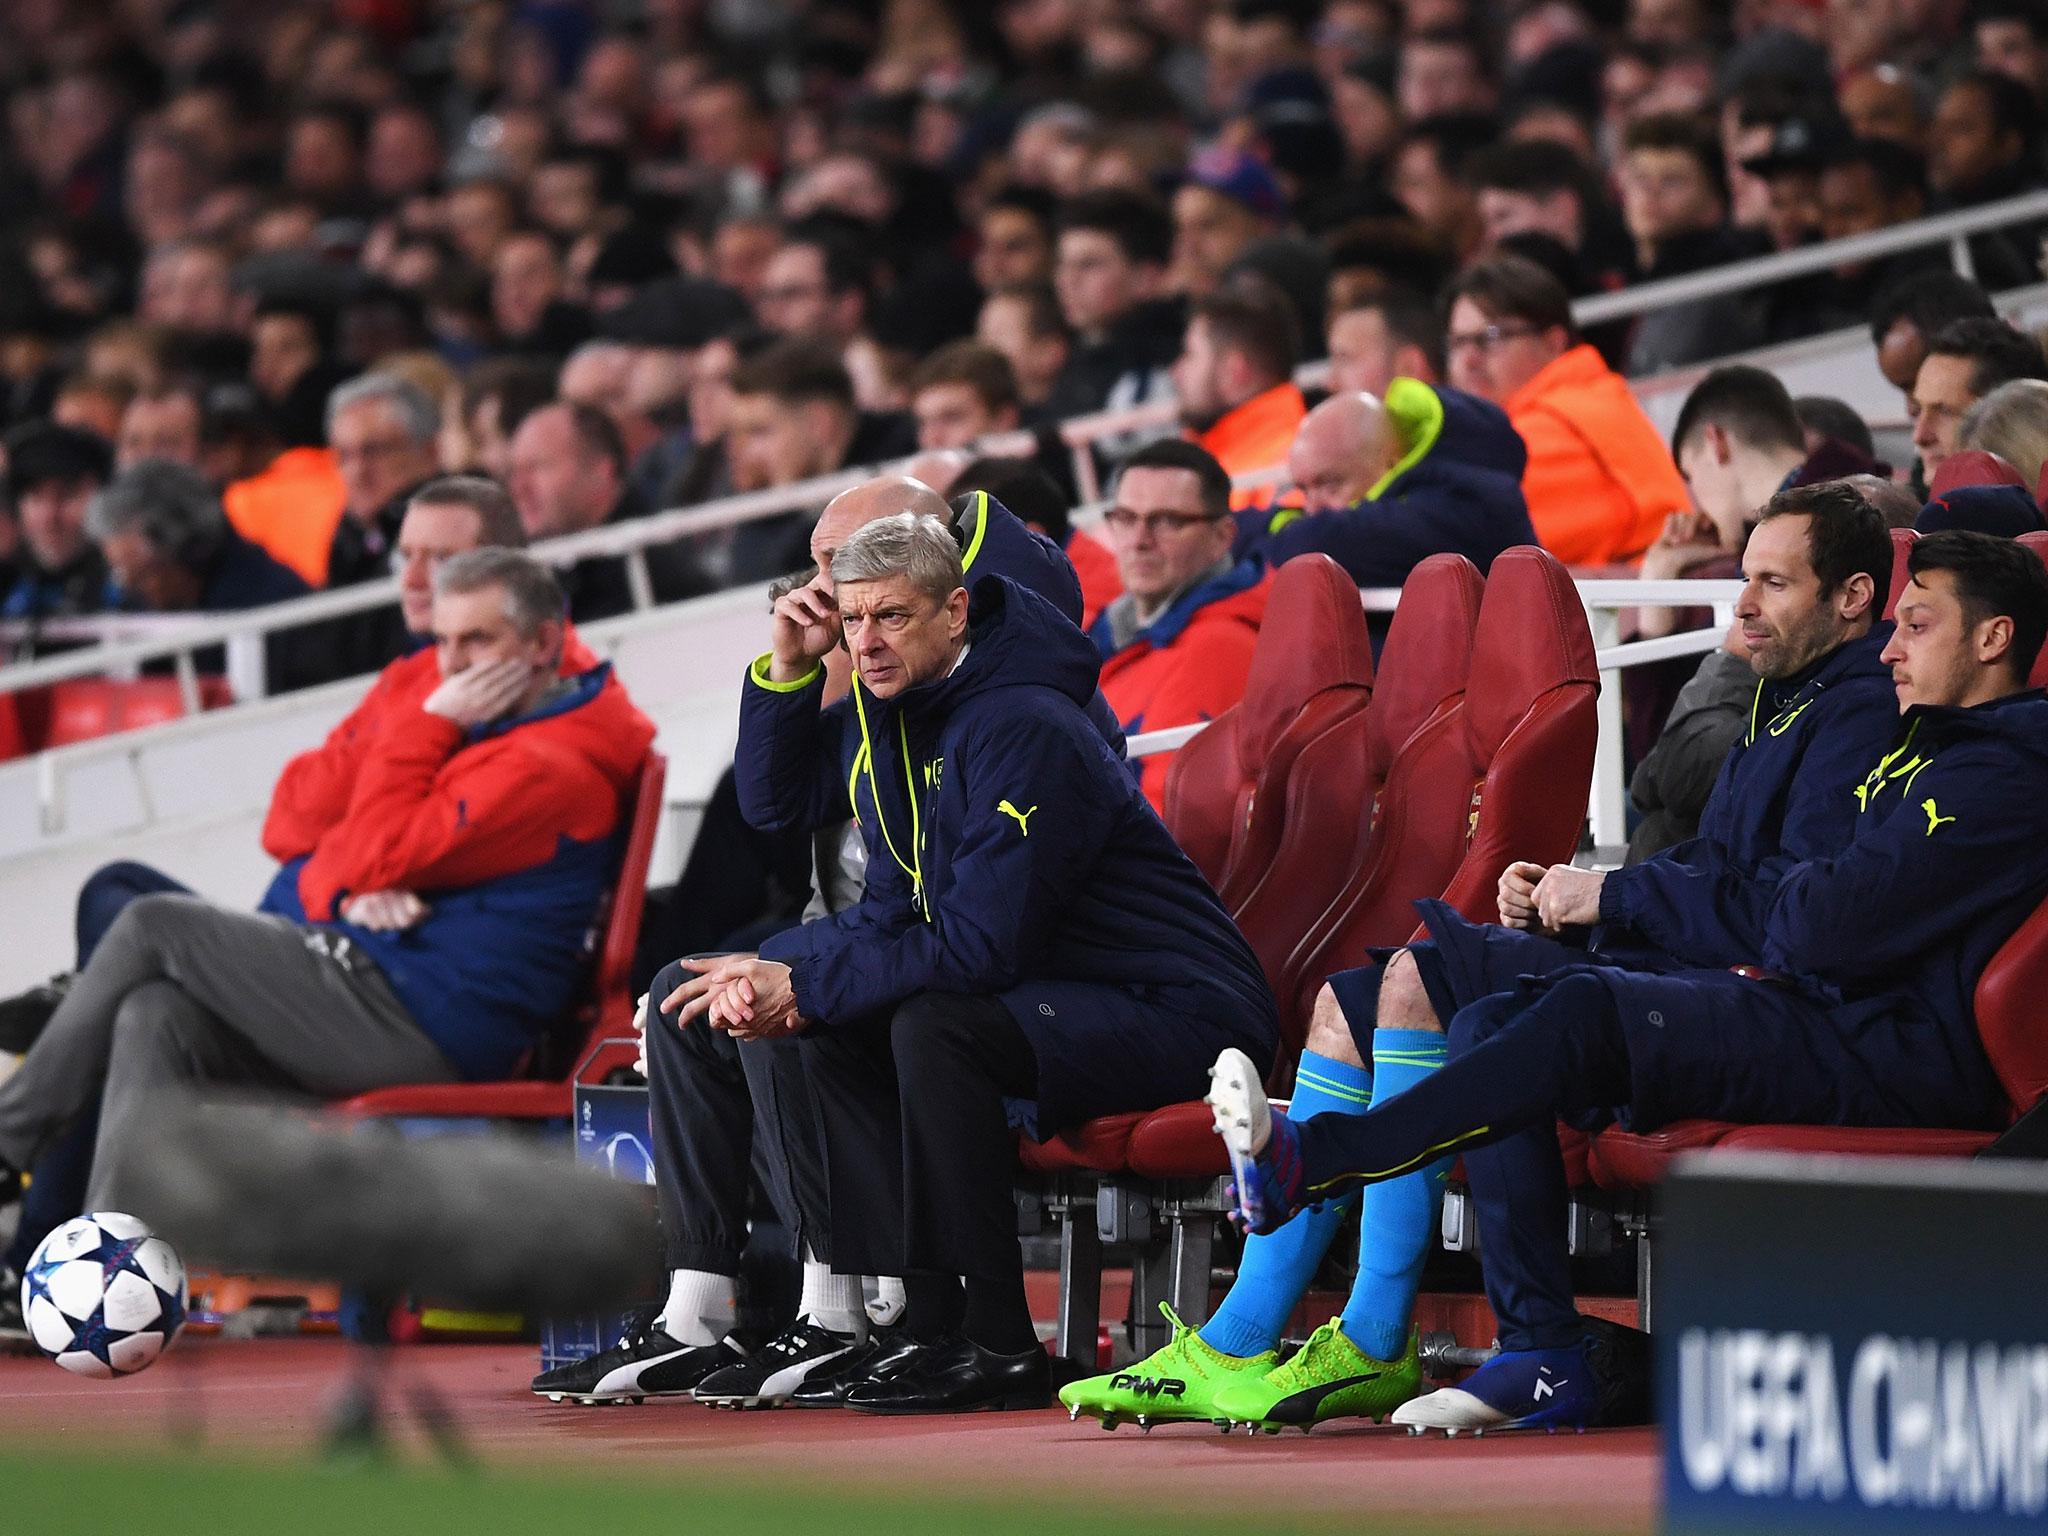 Much of the speculation surrounding Wenger has turned focus away from Arsenal's players